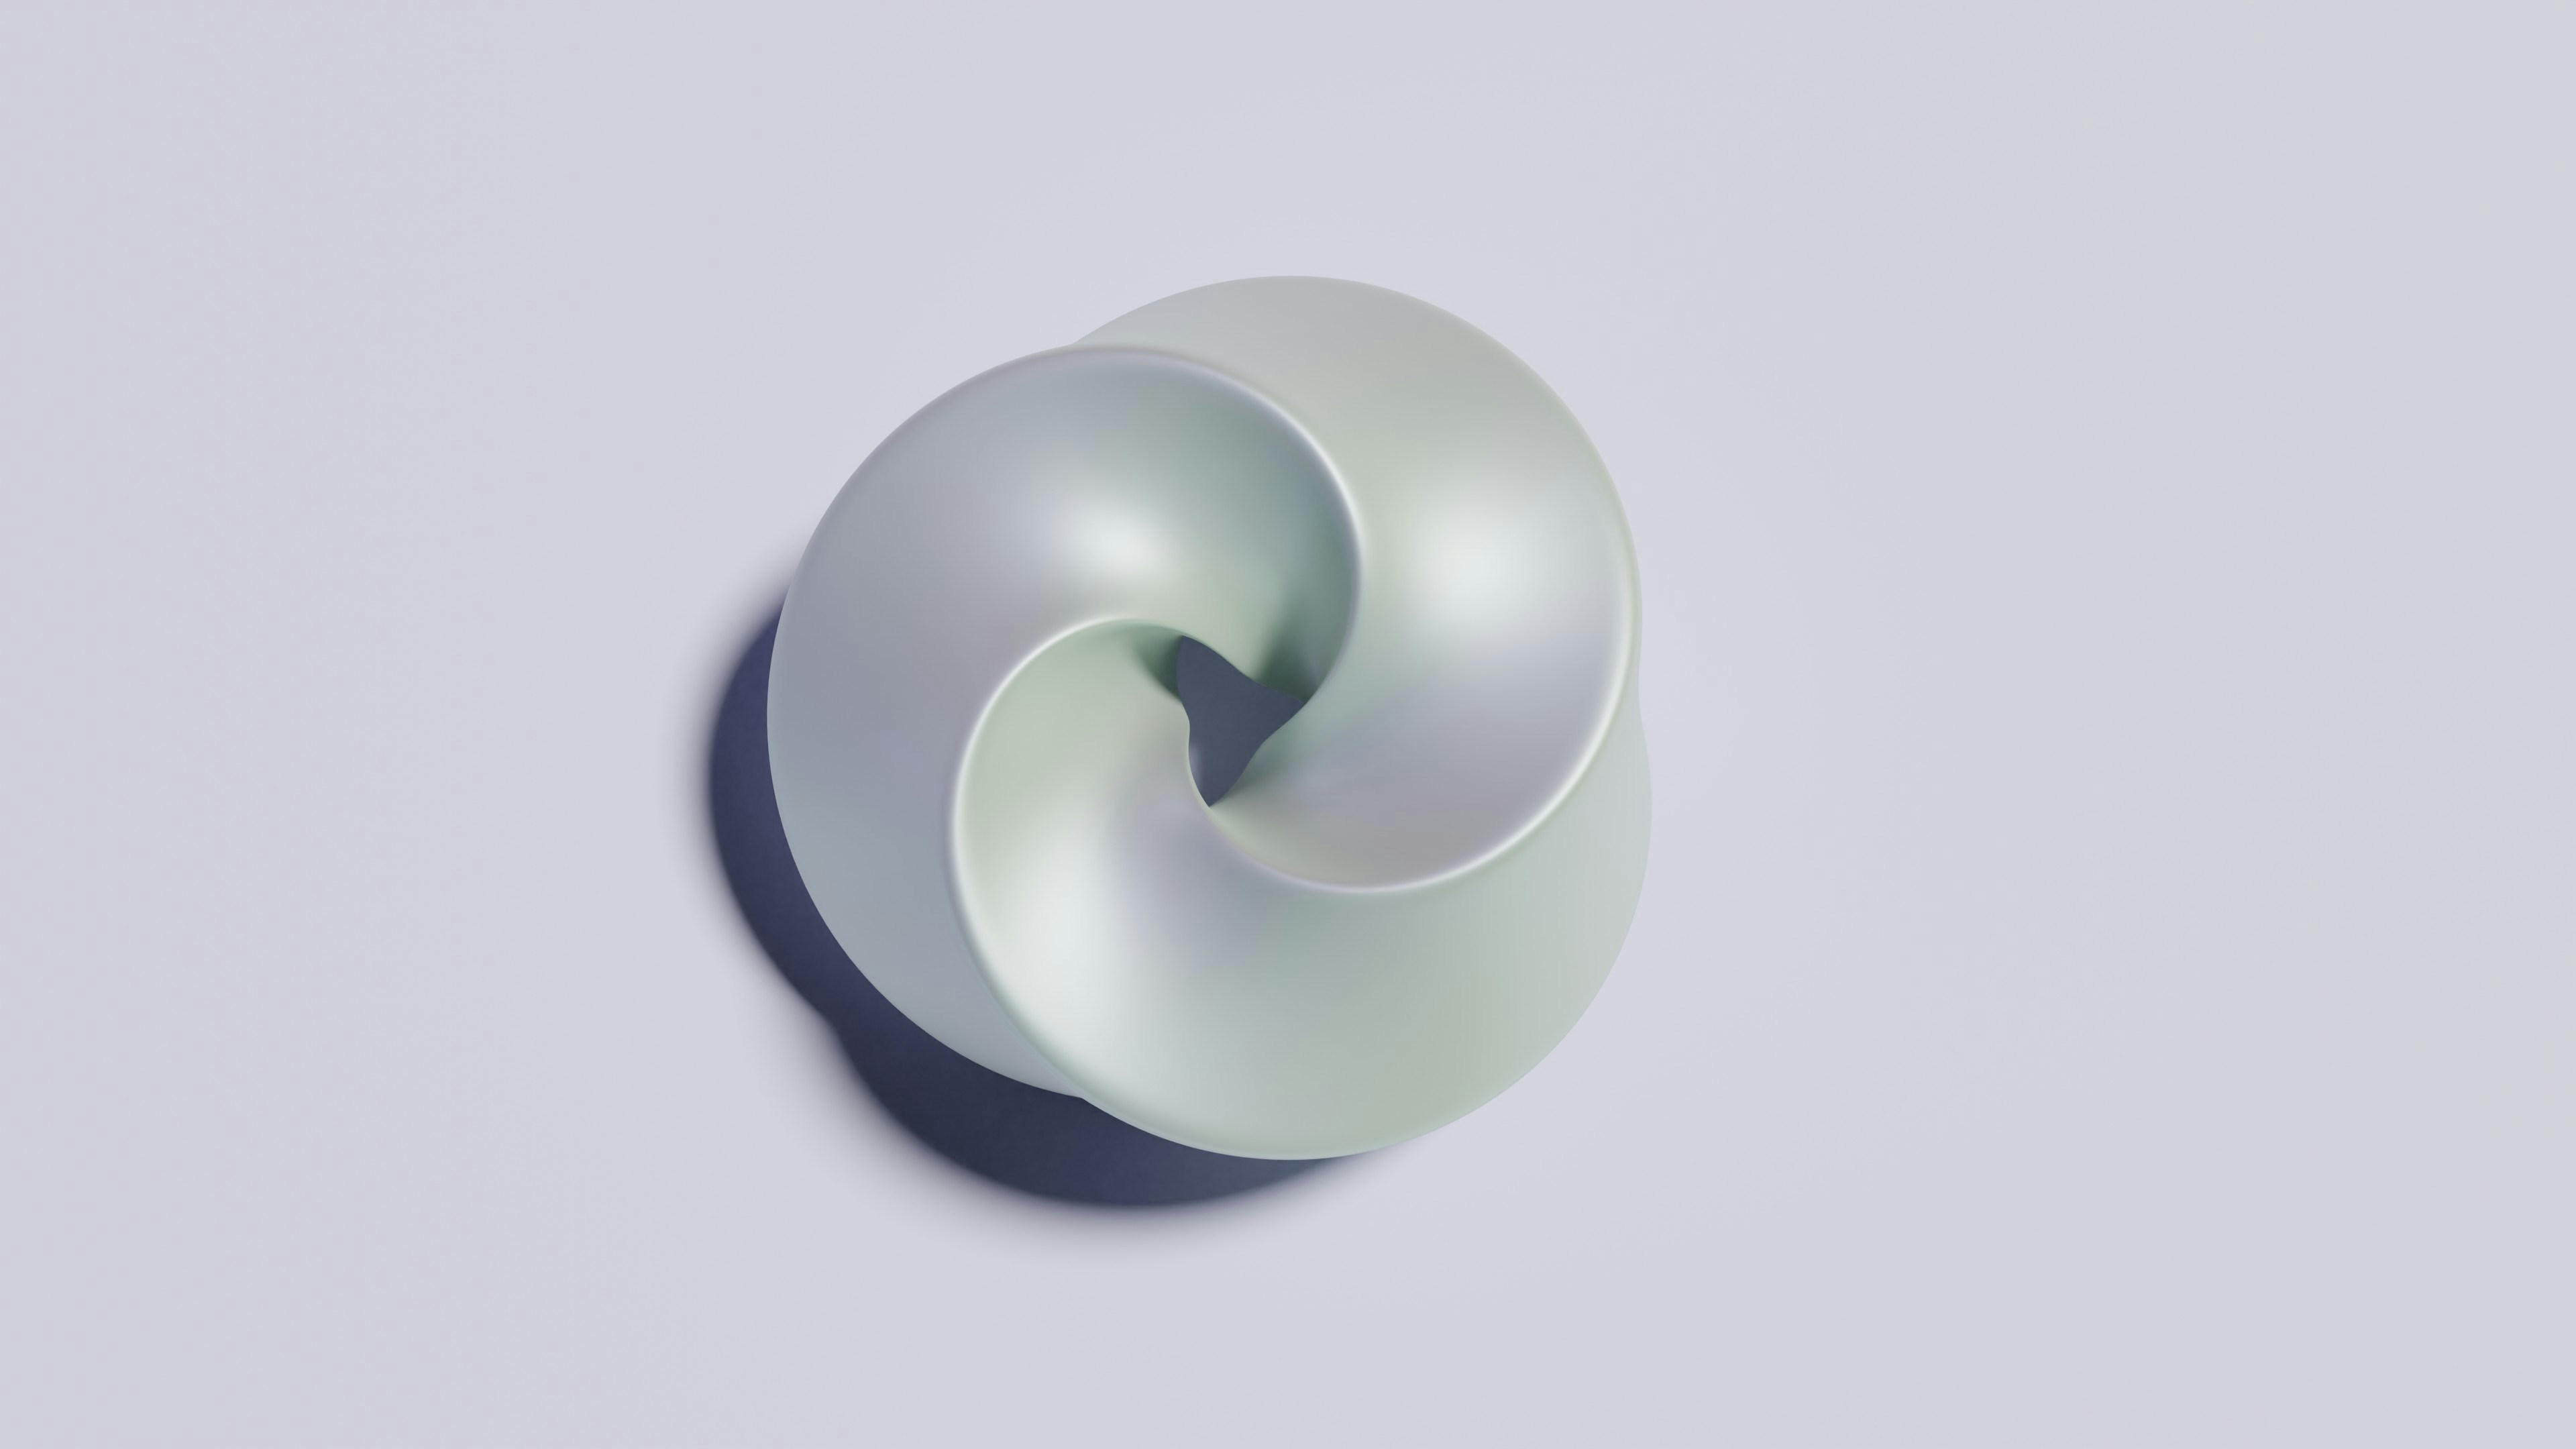 Abstract Möbius strip sculpture symbolizing Understanding Python Iterables and Iterators with a soft gradient and shadow on a light background.